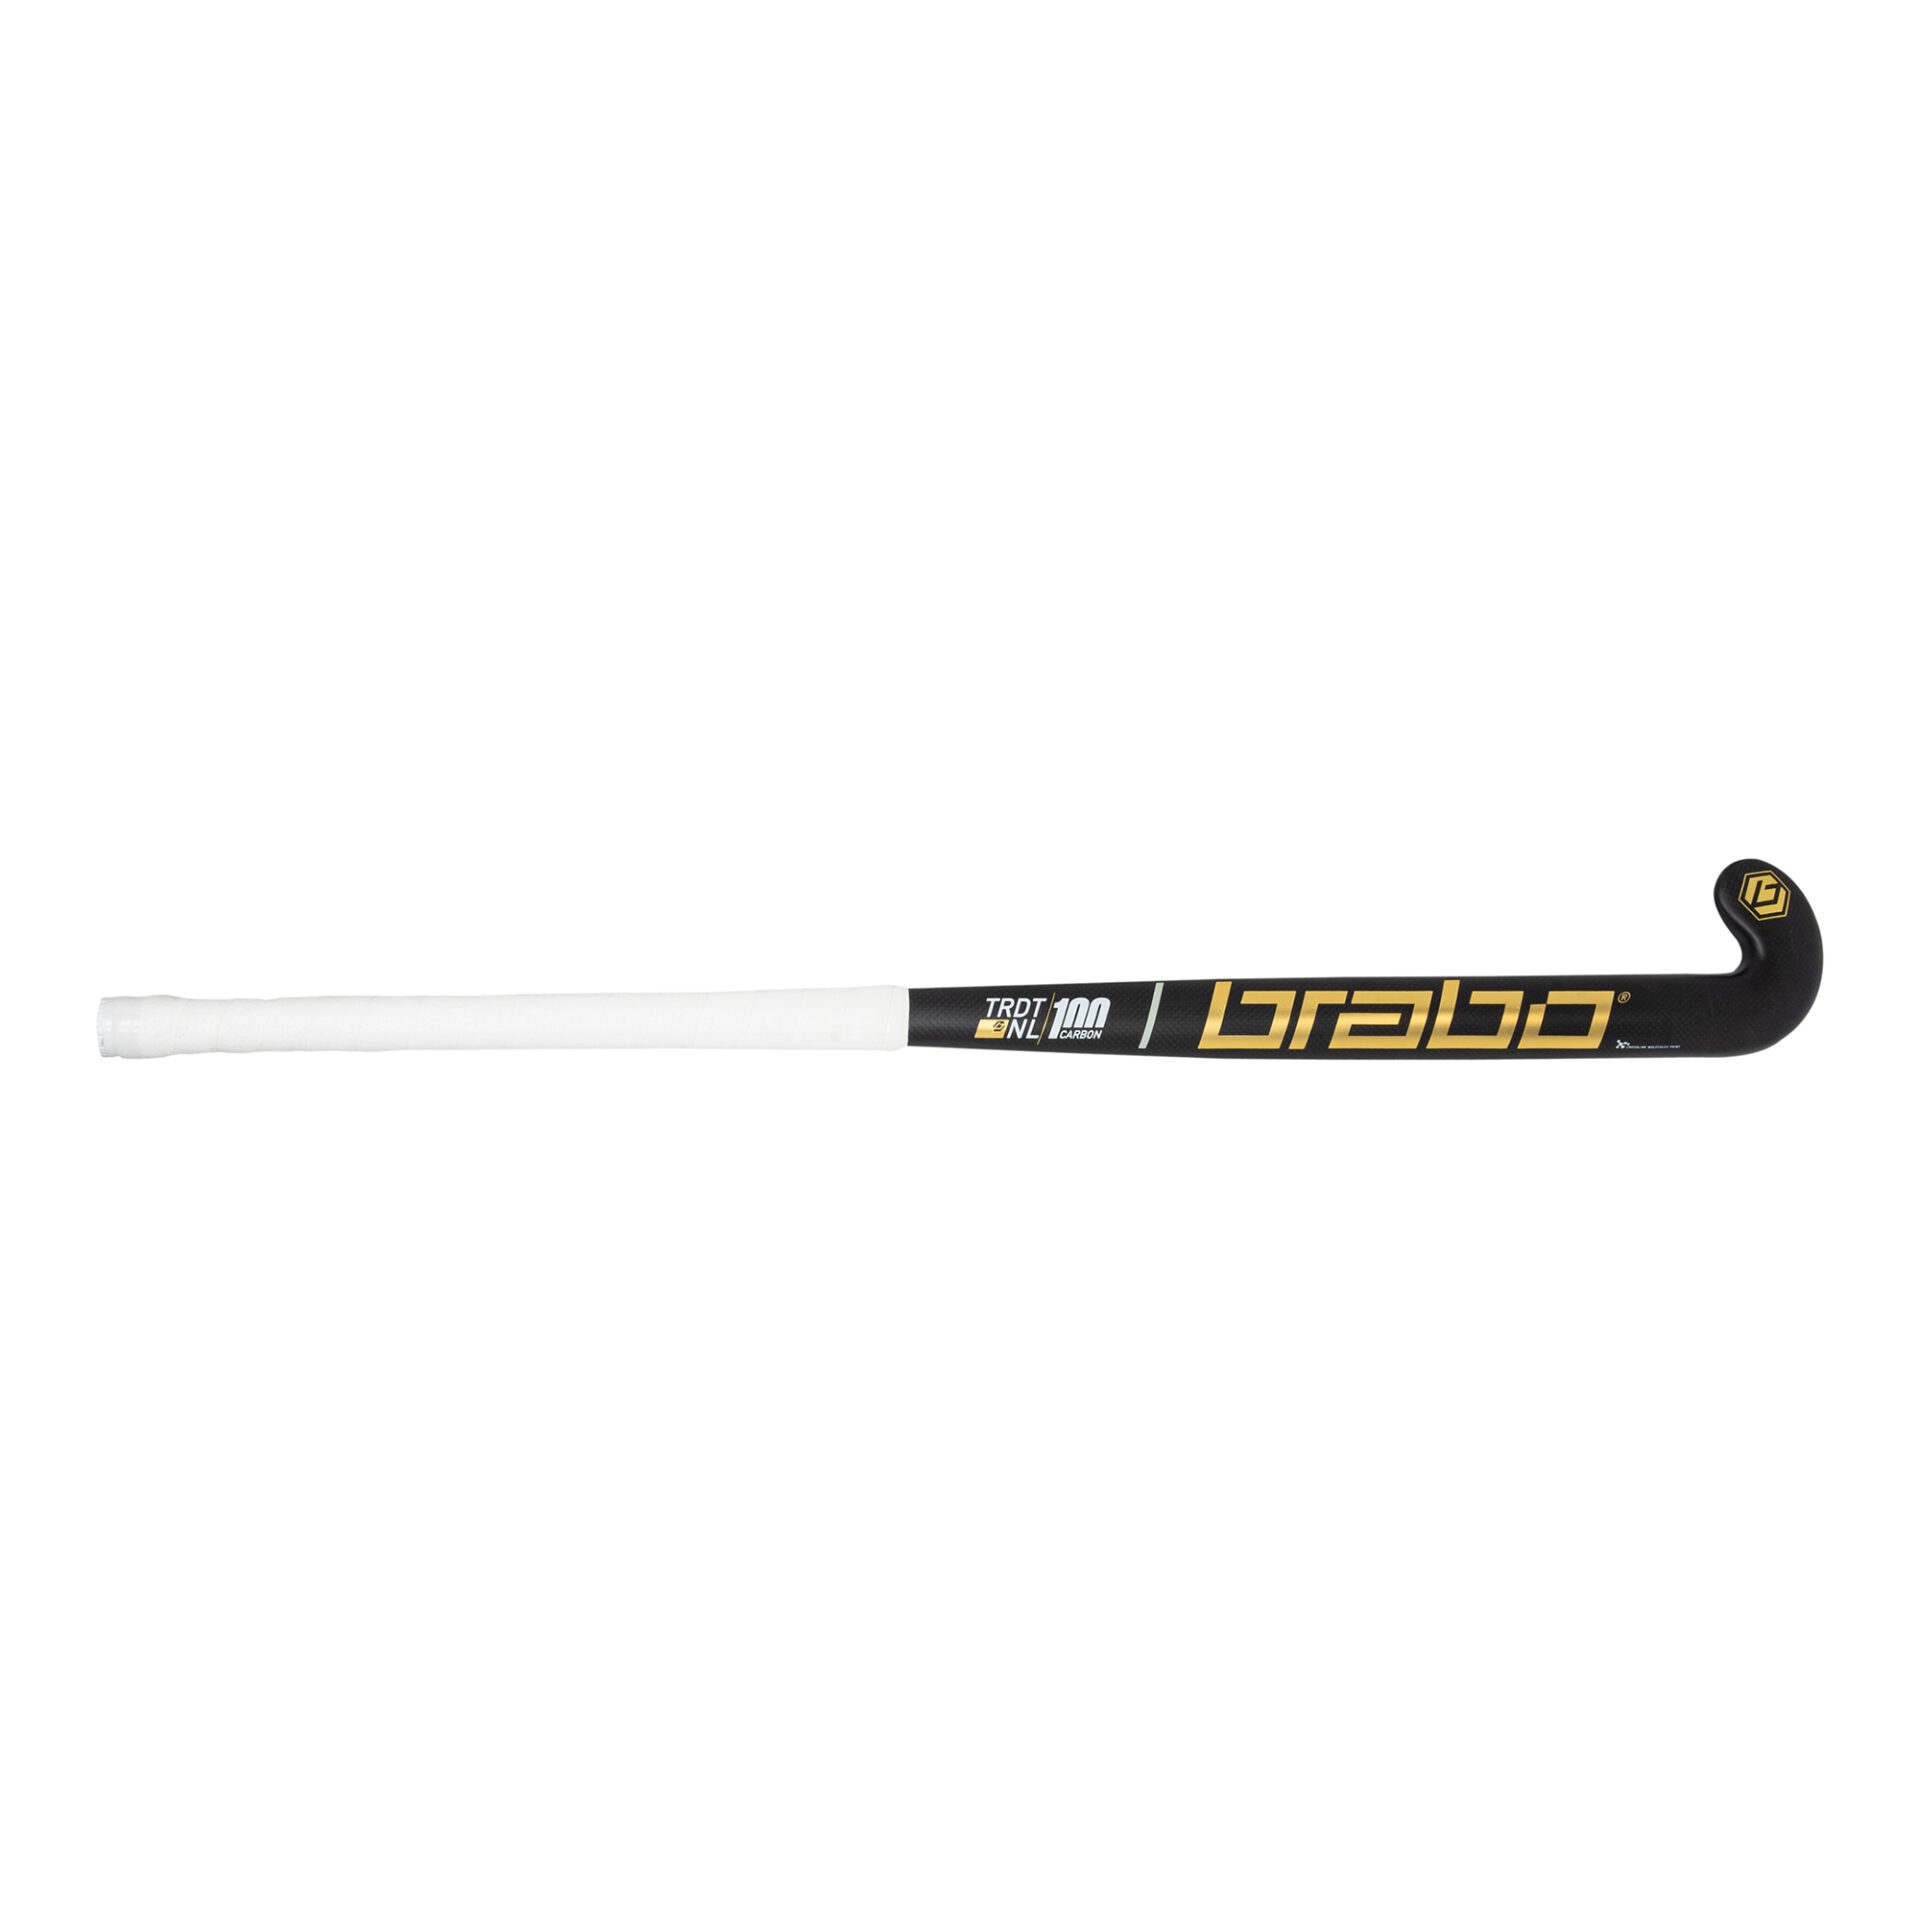 Field Hockey Stick Red Curve 90% Composite Carbon 10% Fiber Glass Extreme  Low Bow - Power Curves 36.5'' Inch 37.5'' Inch